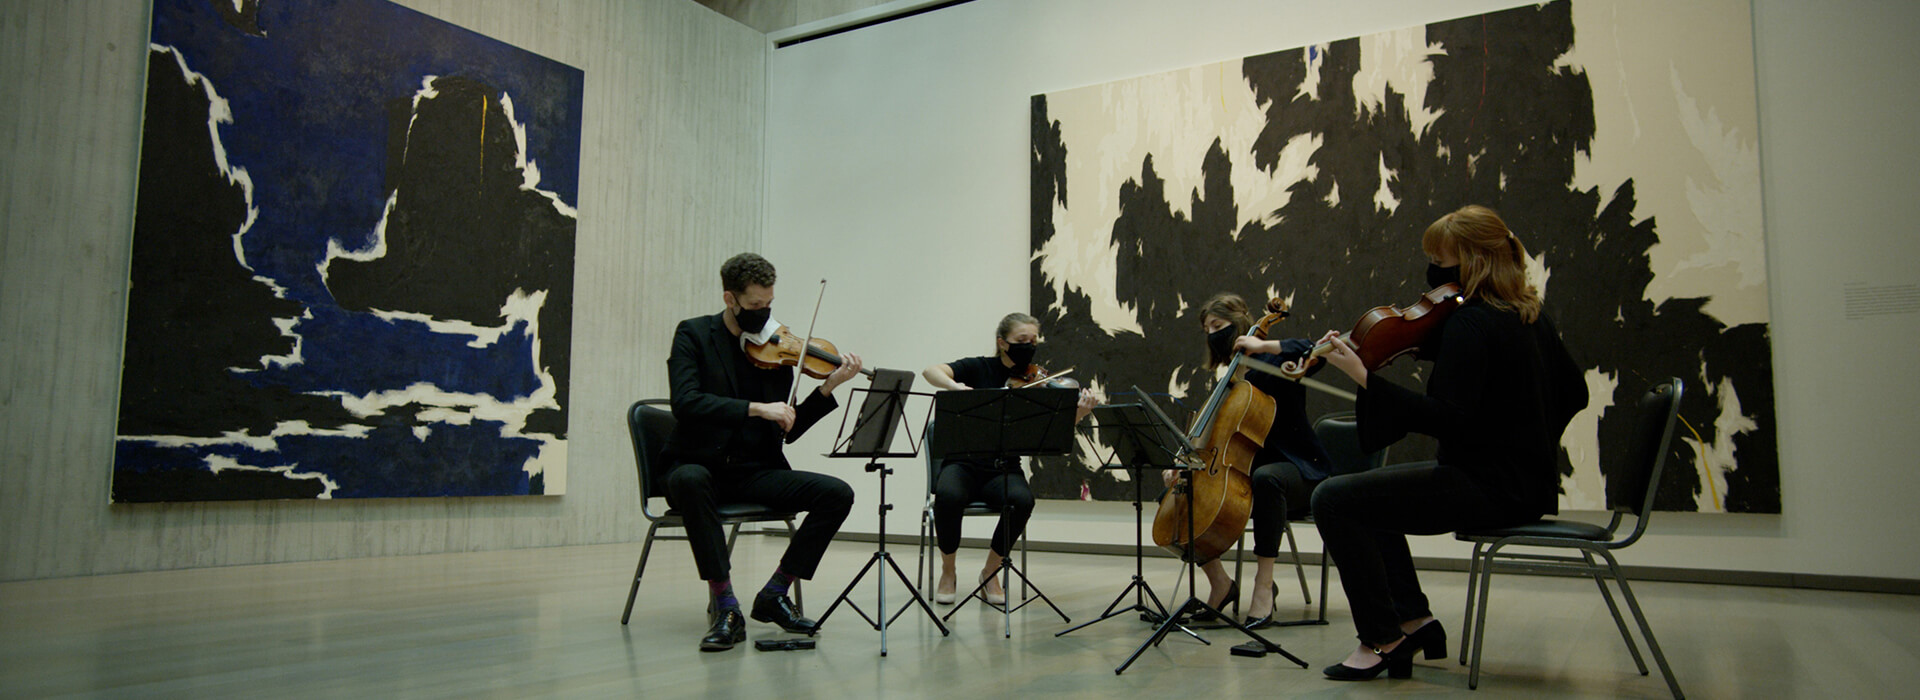 String quartet plays in front of a large black and white abstract painting